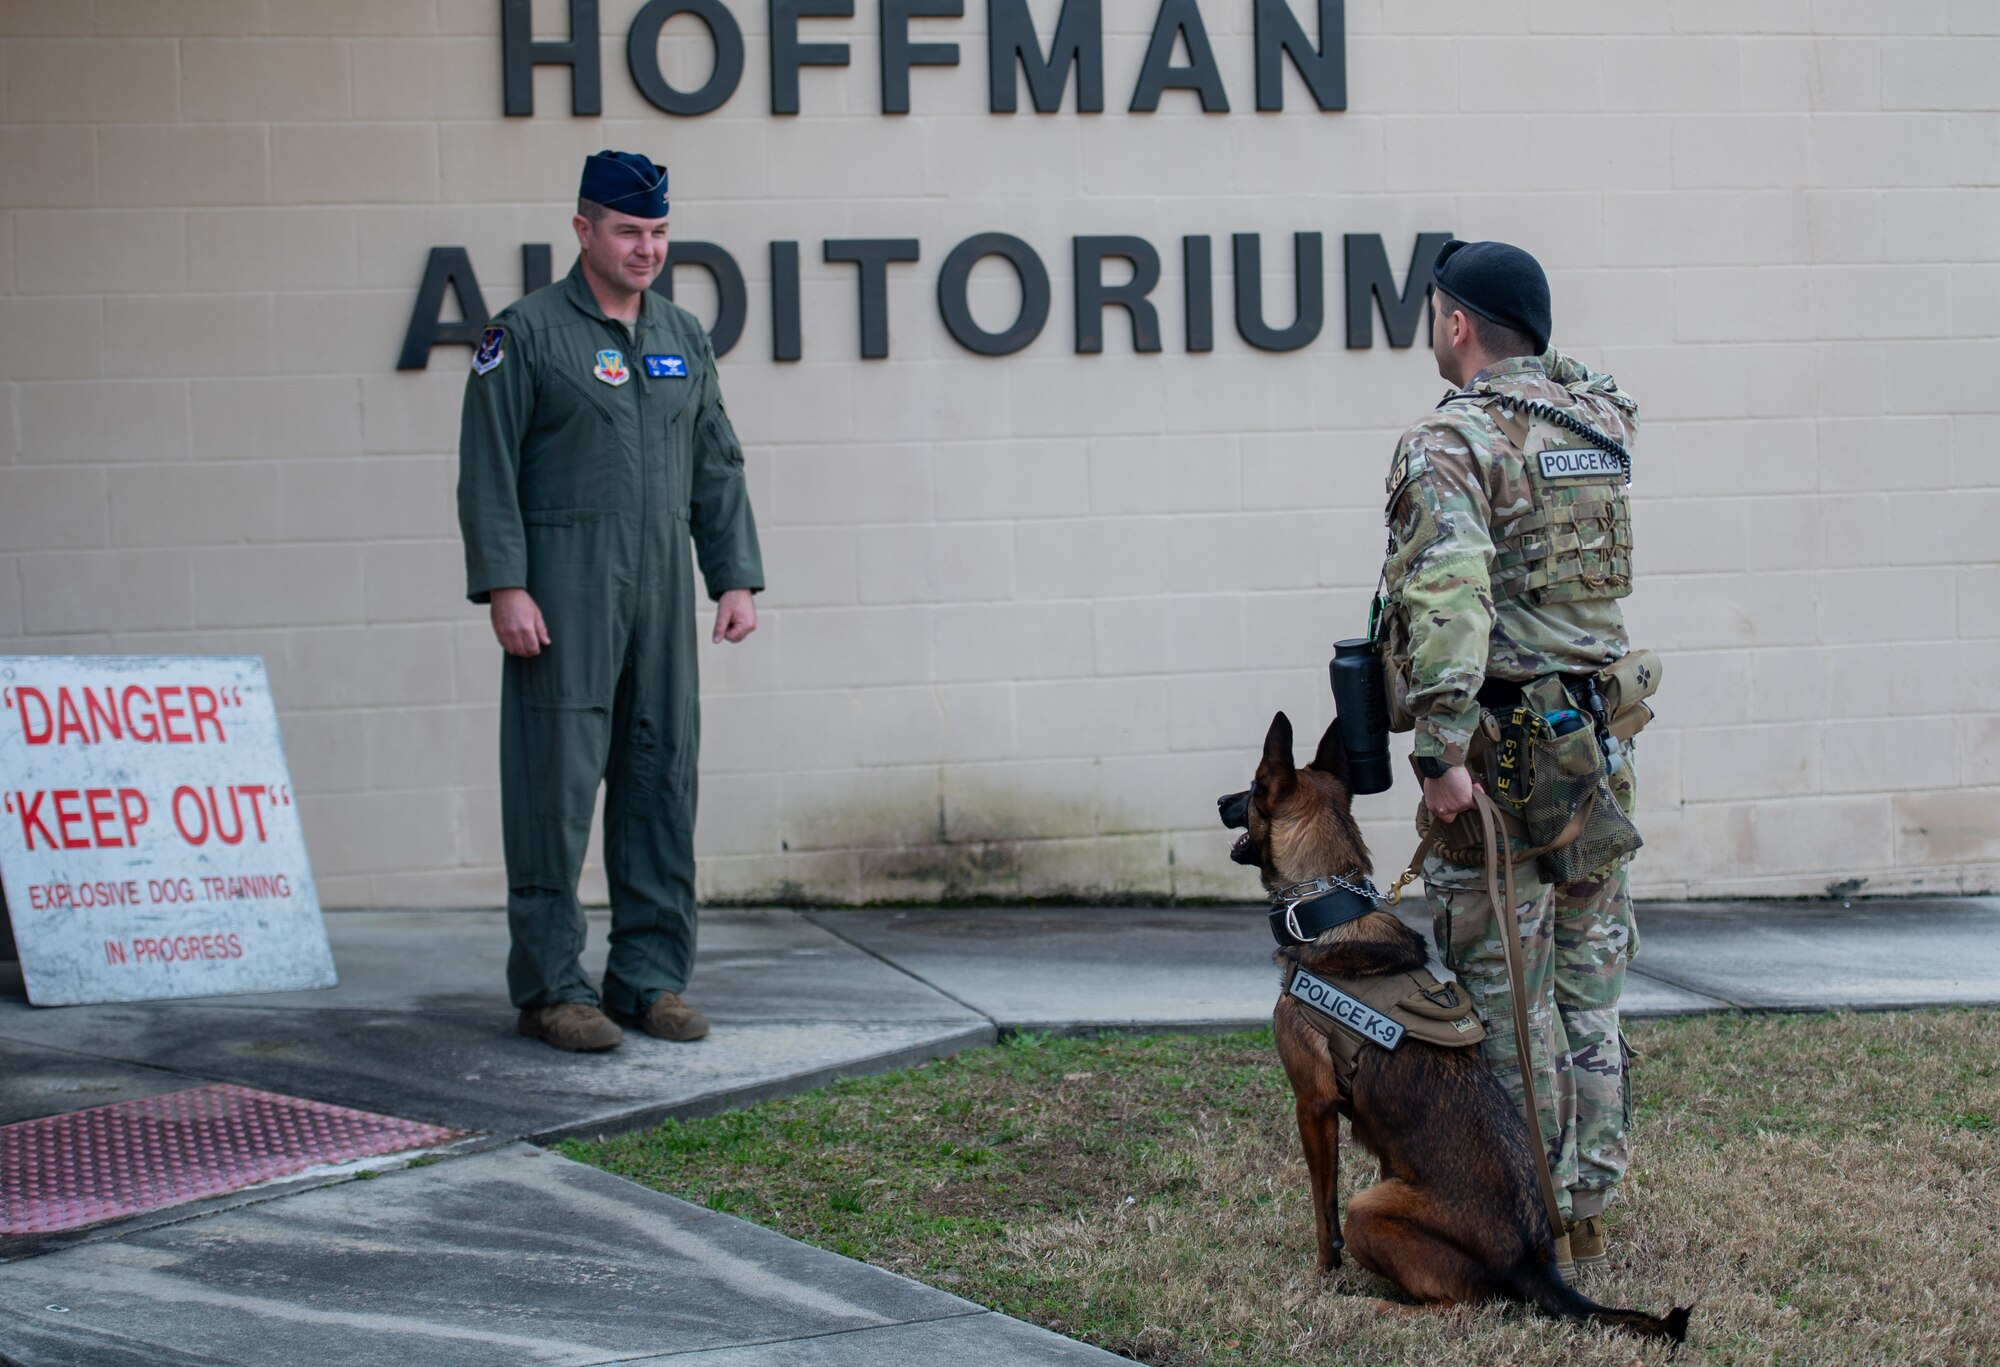 MWD handler salutes wing commander after mwd certification